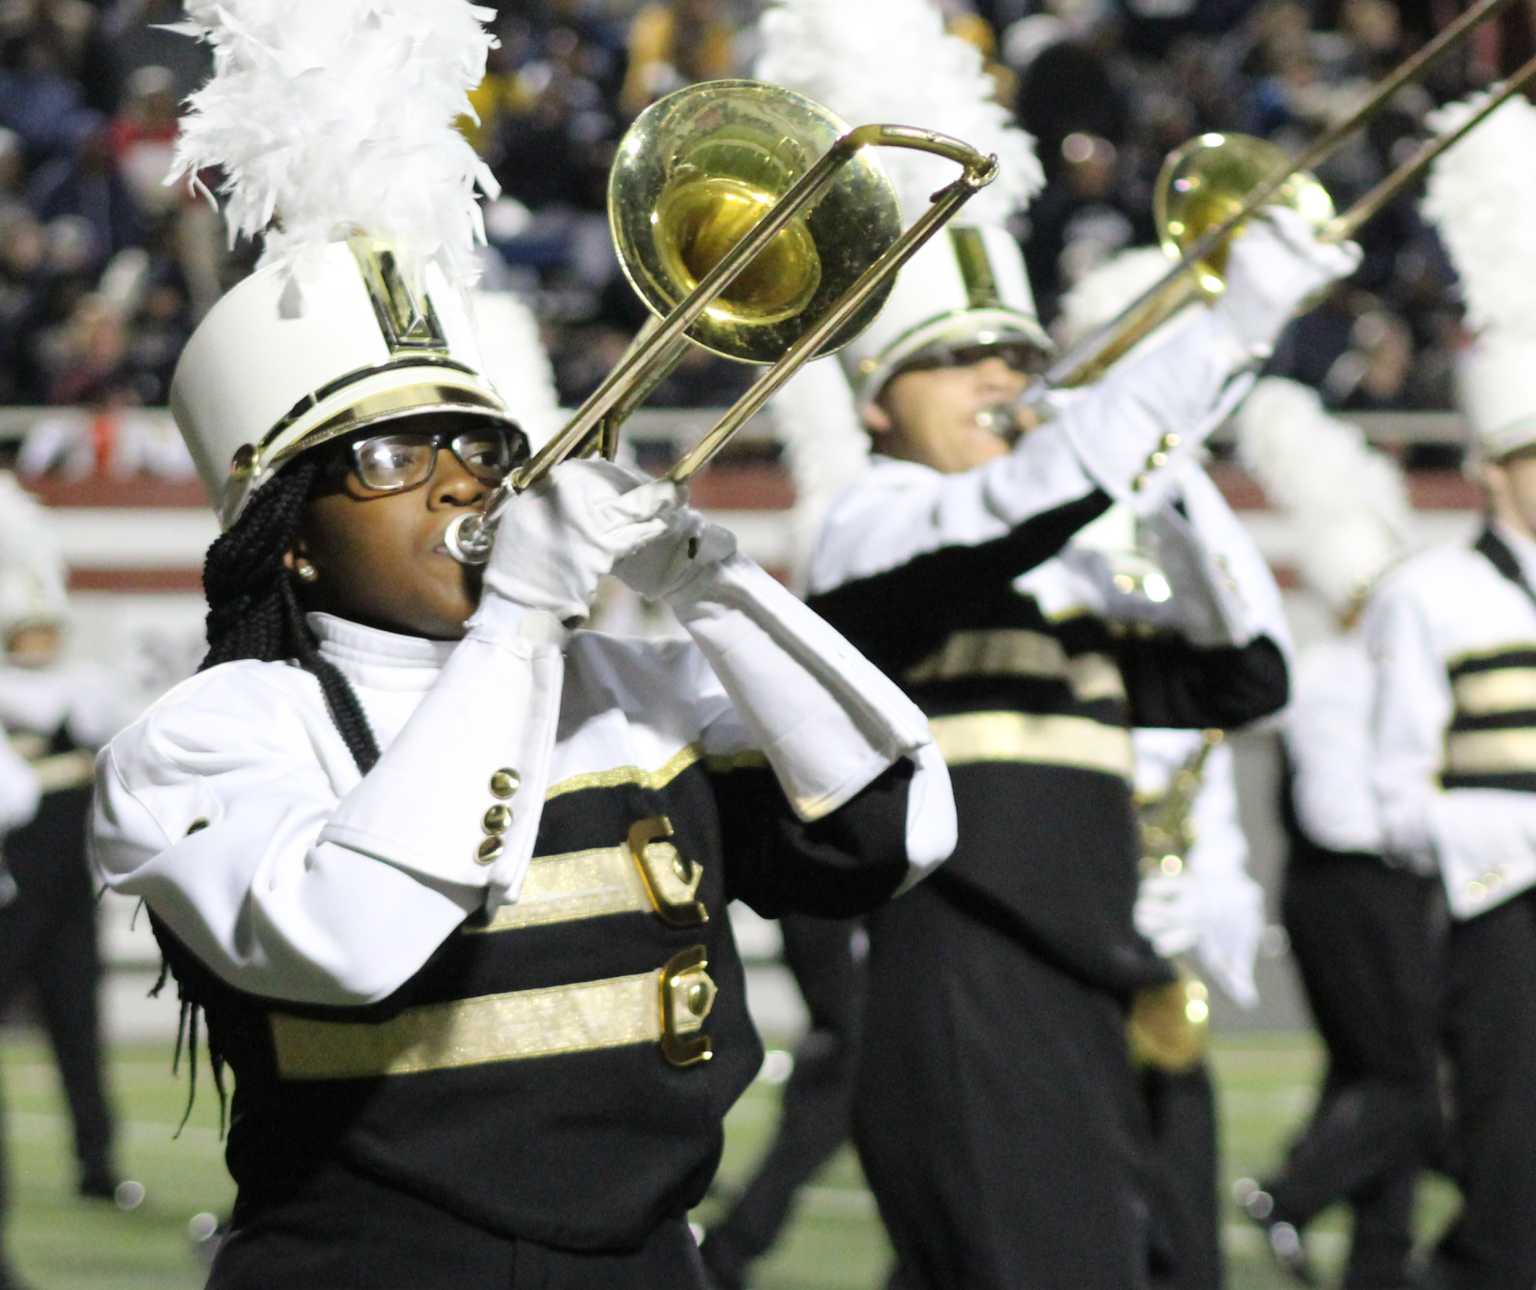 7 Best High School Marching Bands (and Their Football Teams) - ITG Next